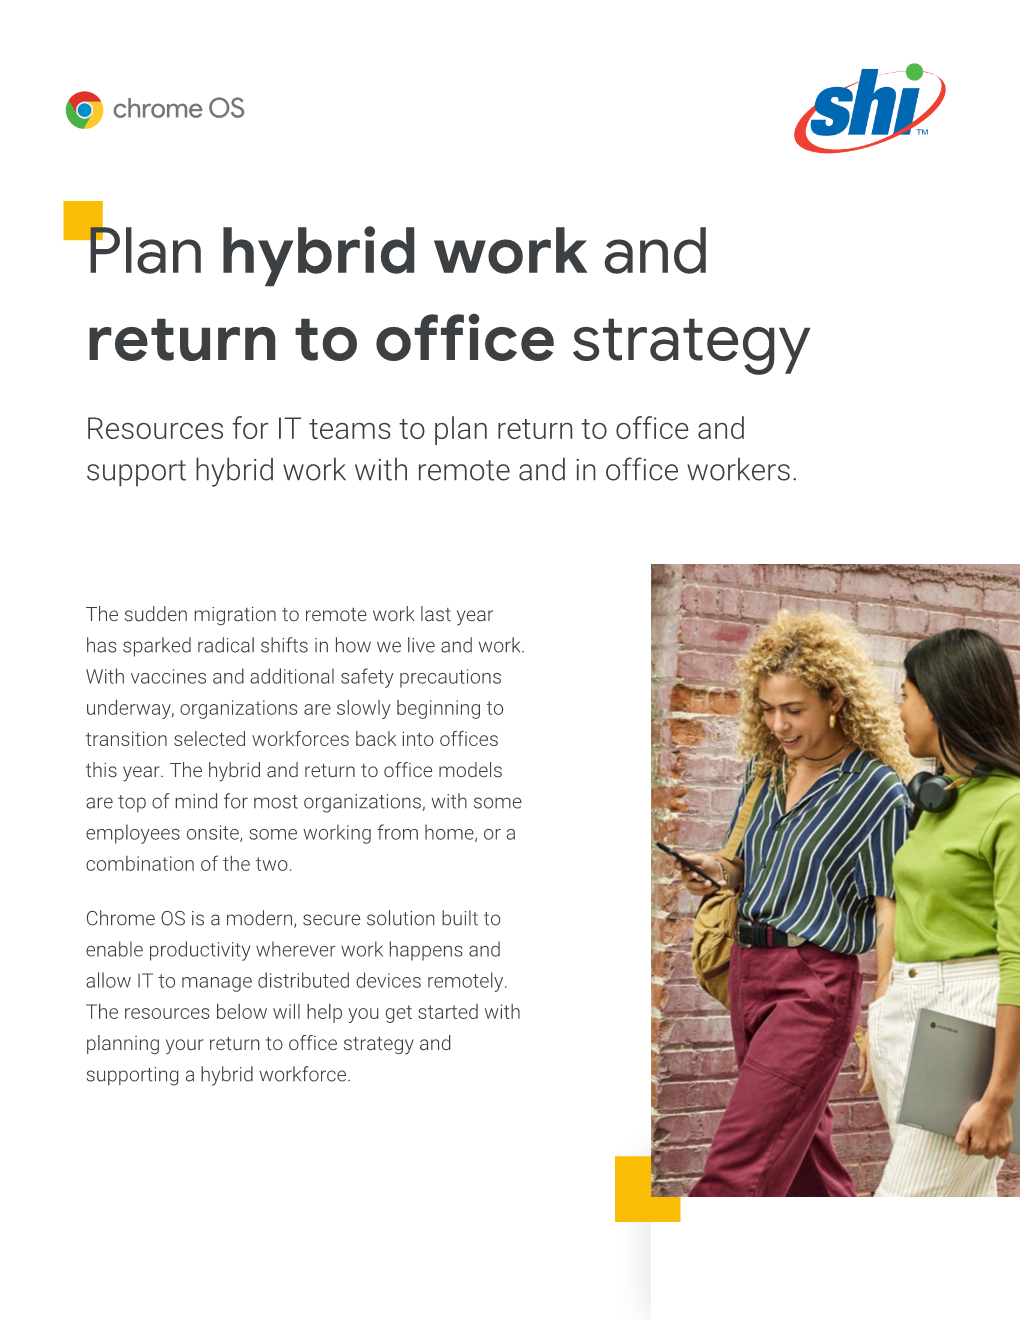 Plan Hybrid Work and Return to Office Strategy